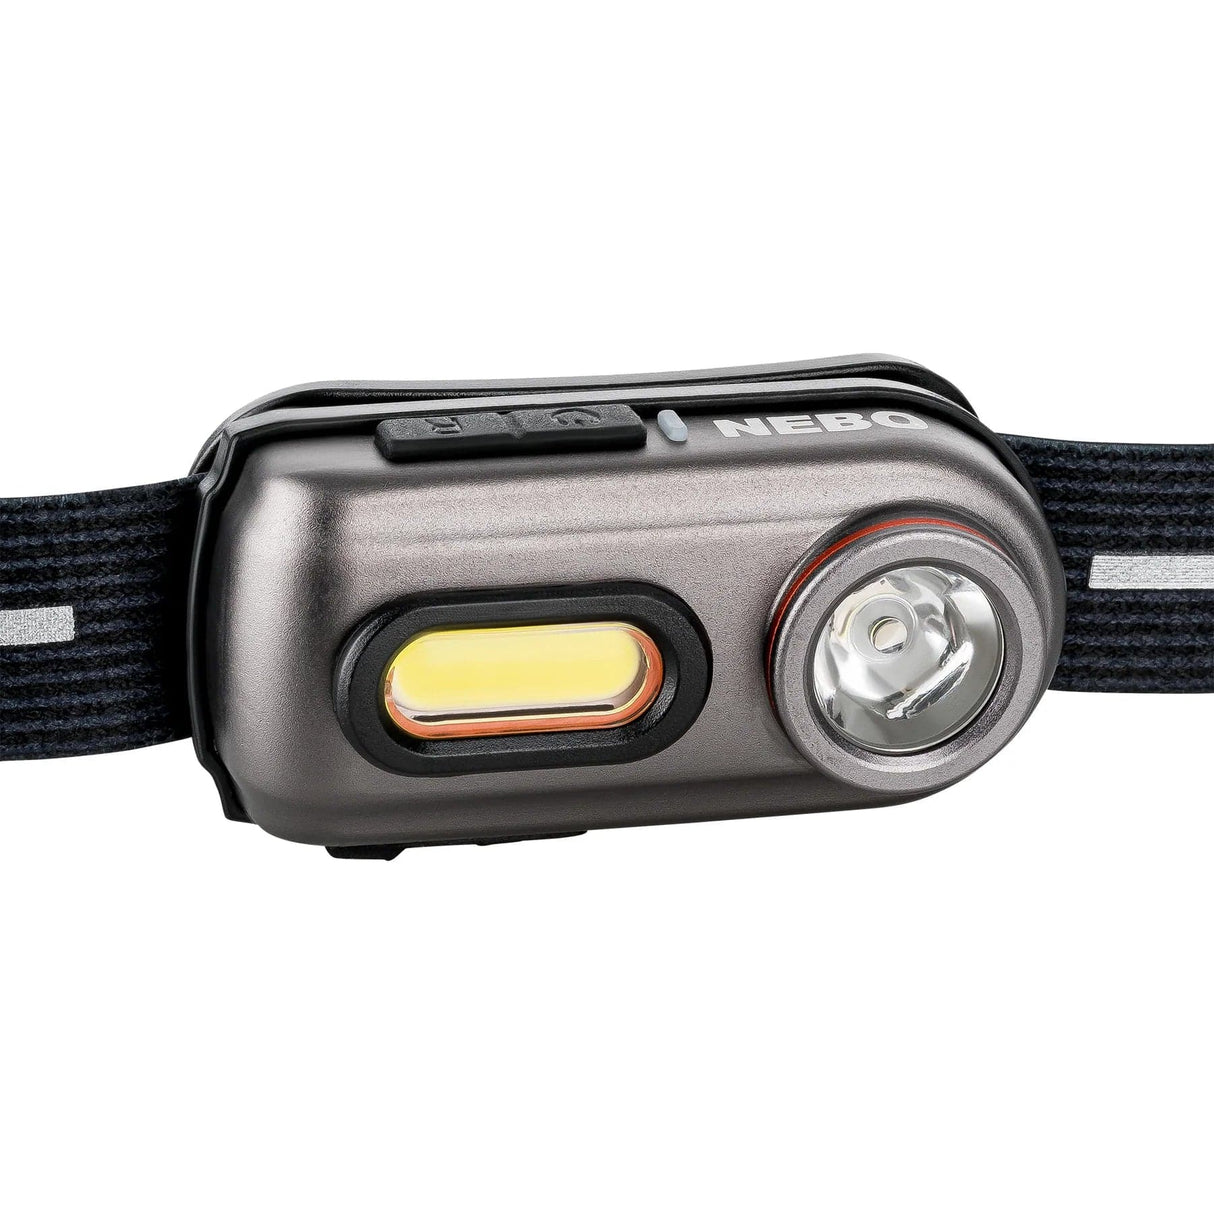 NEBO Head Torches NEBO Einstein 400 Rechargeable Headlamp White and Red LED